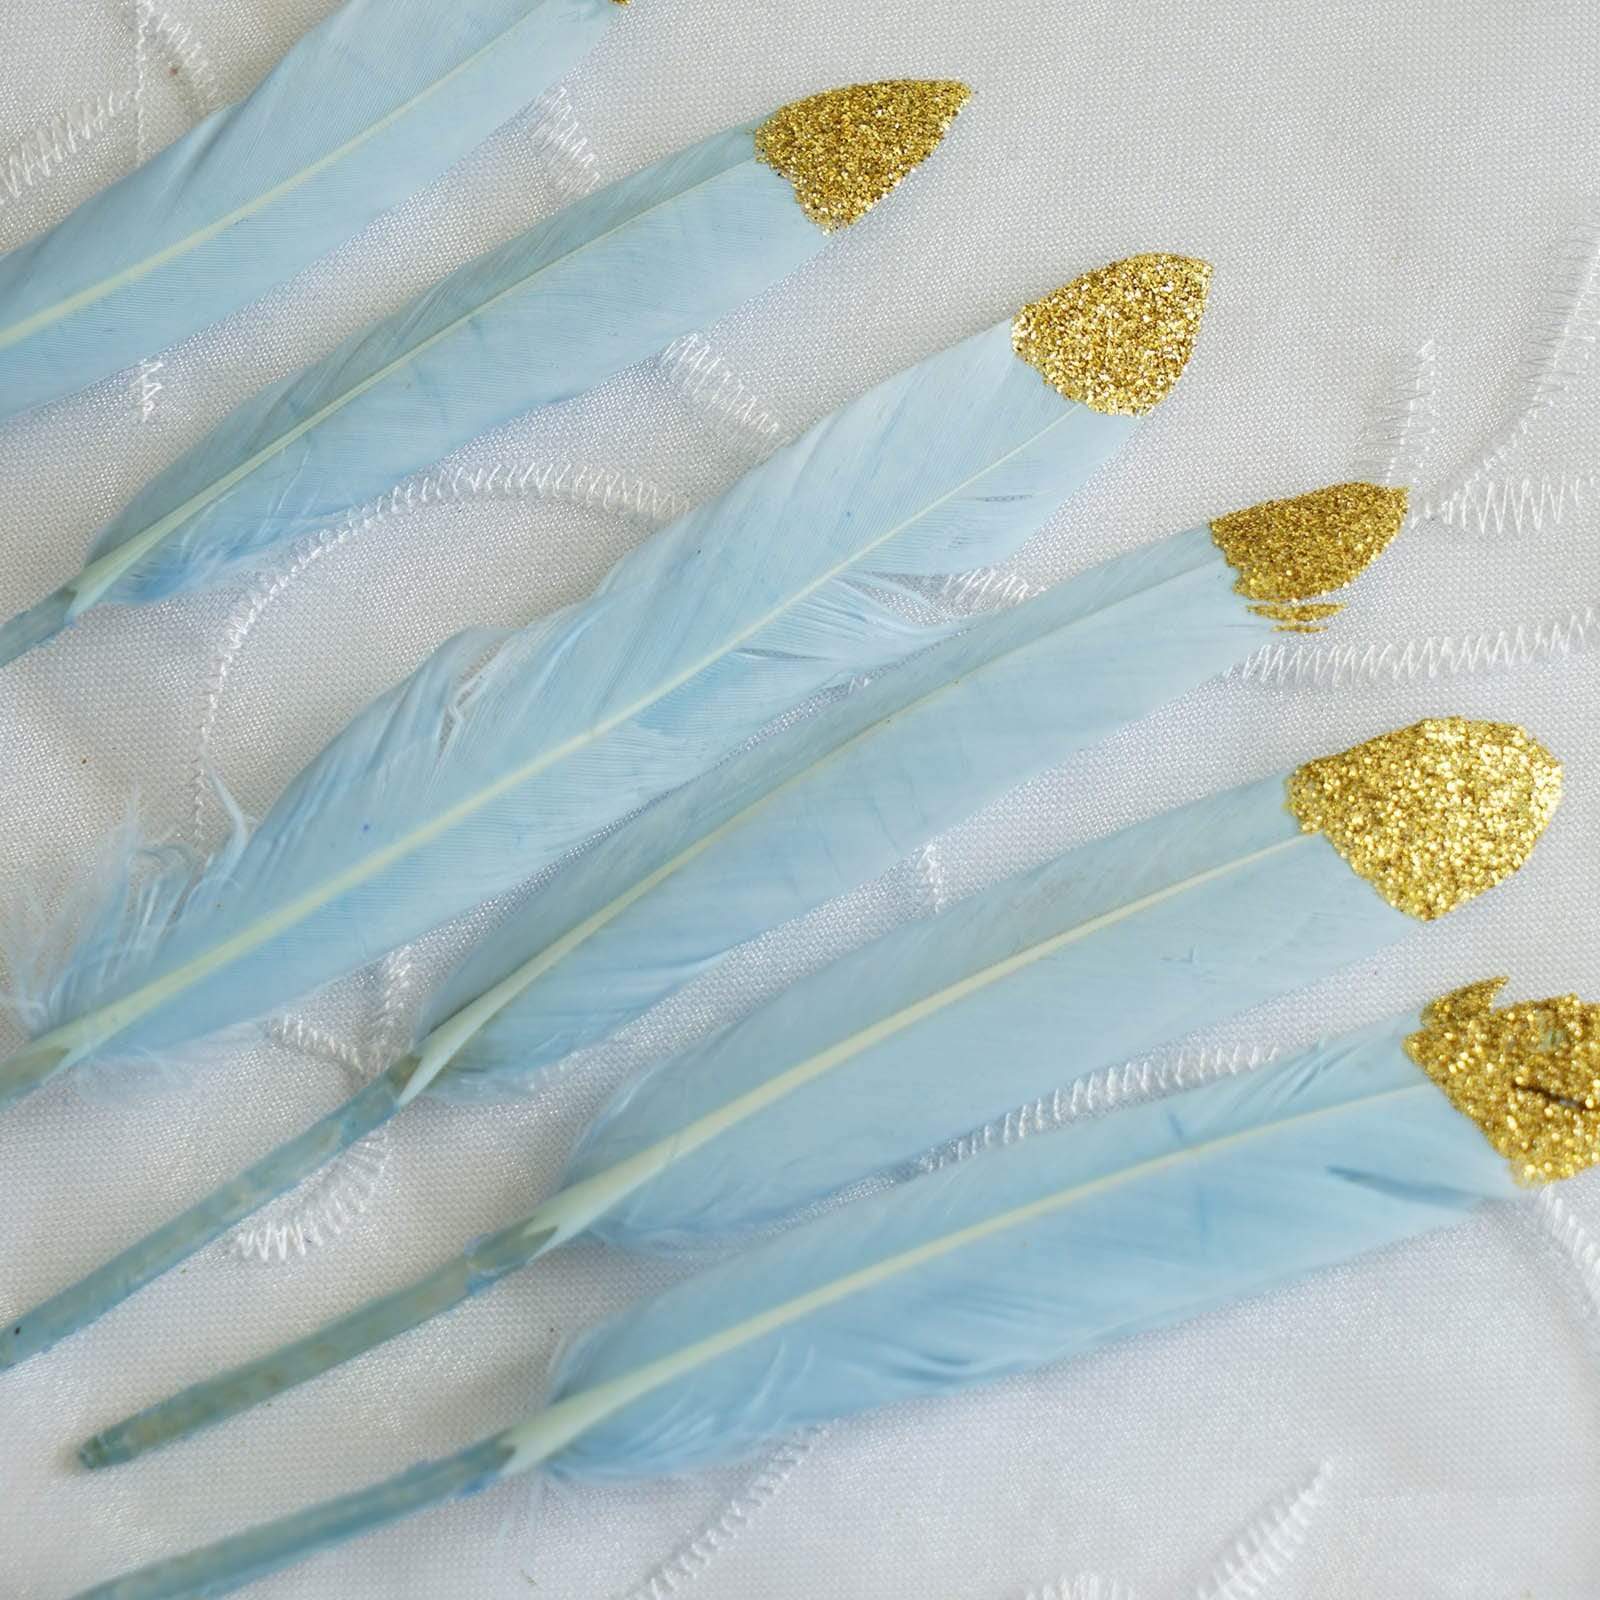 30 pcs Glittered Tip Natural Turkey Feathers